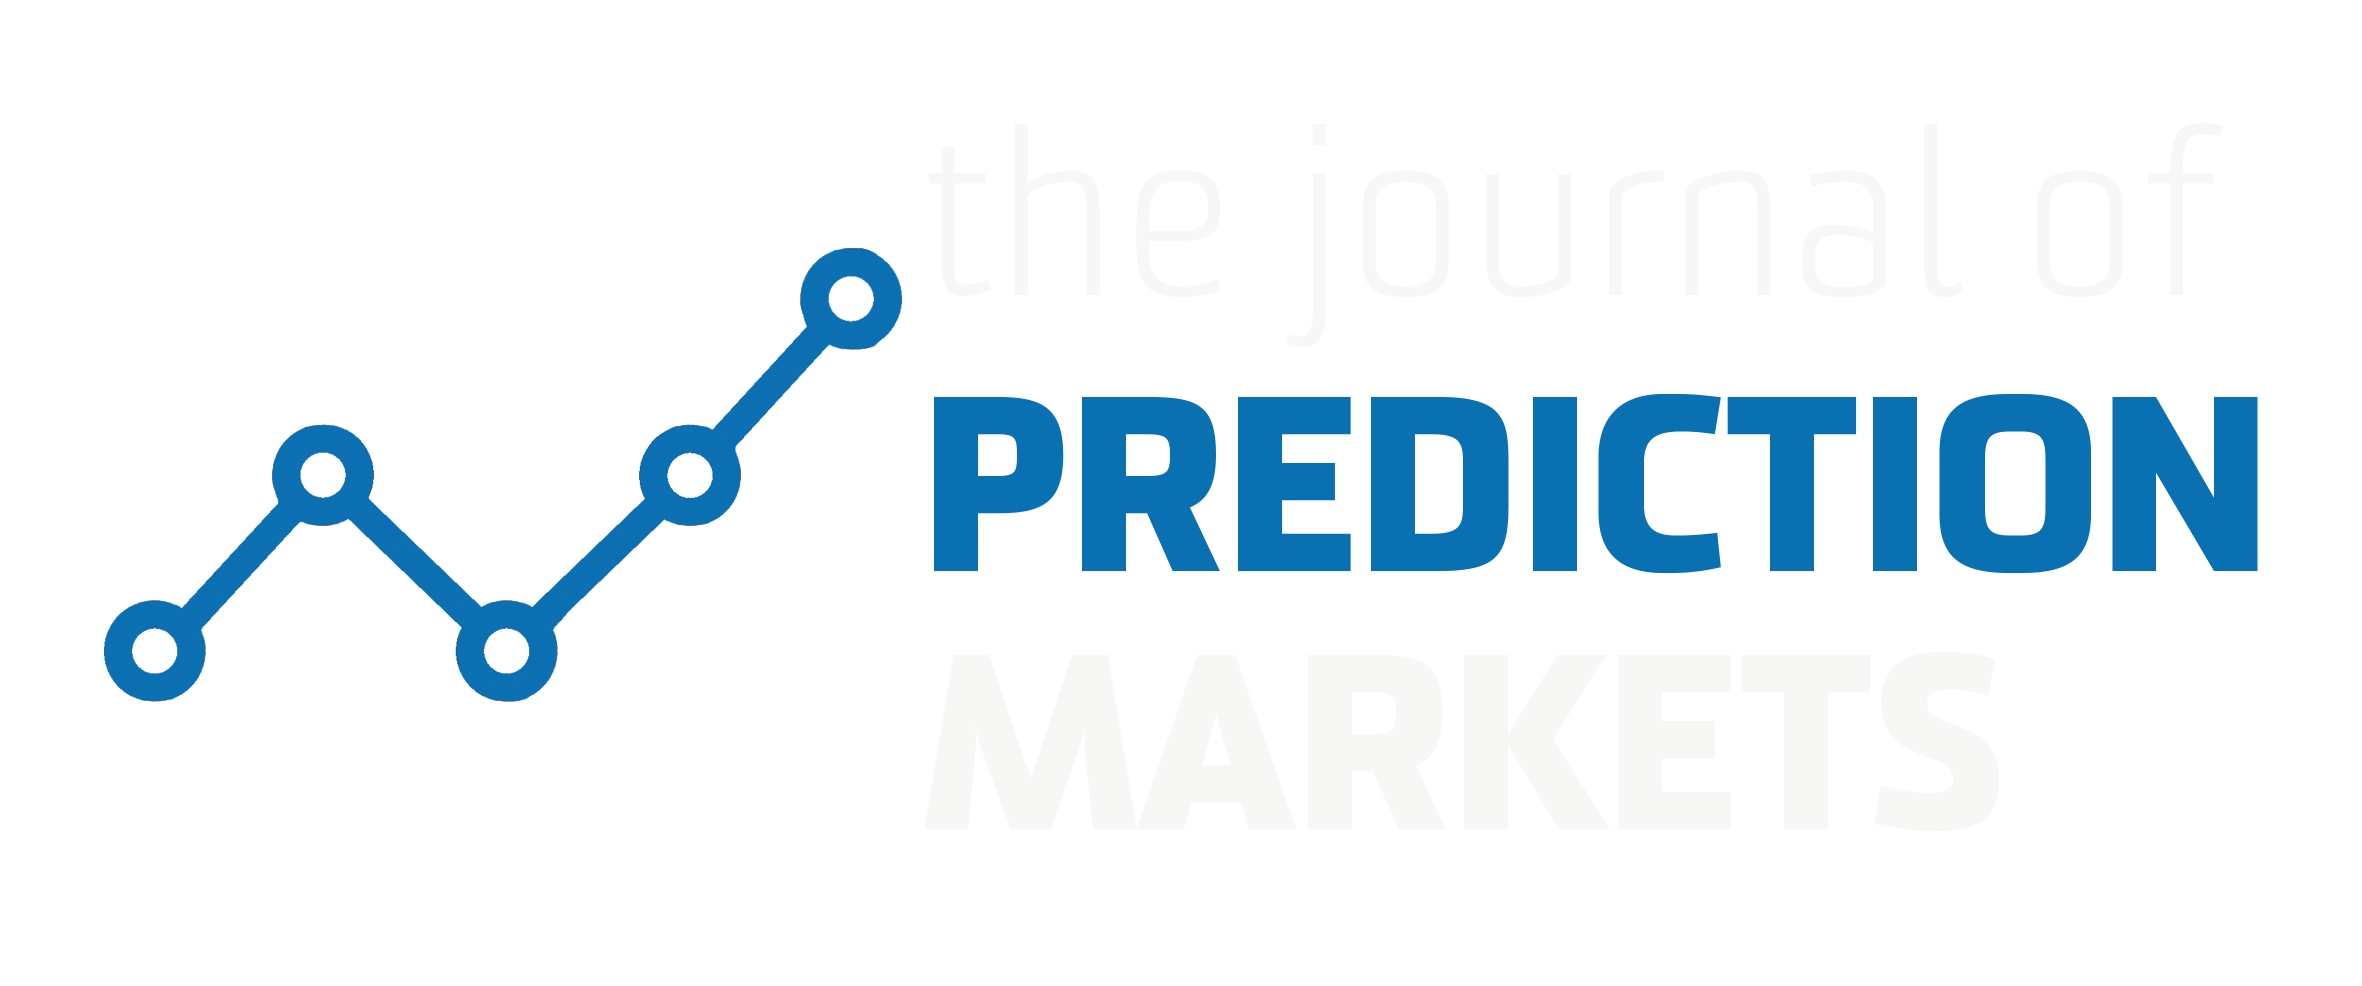 Journal of Prediction Markets